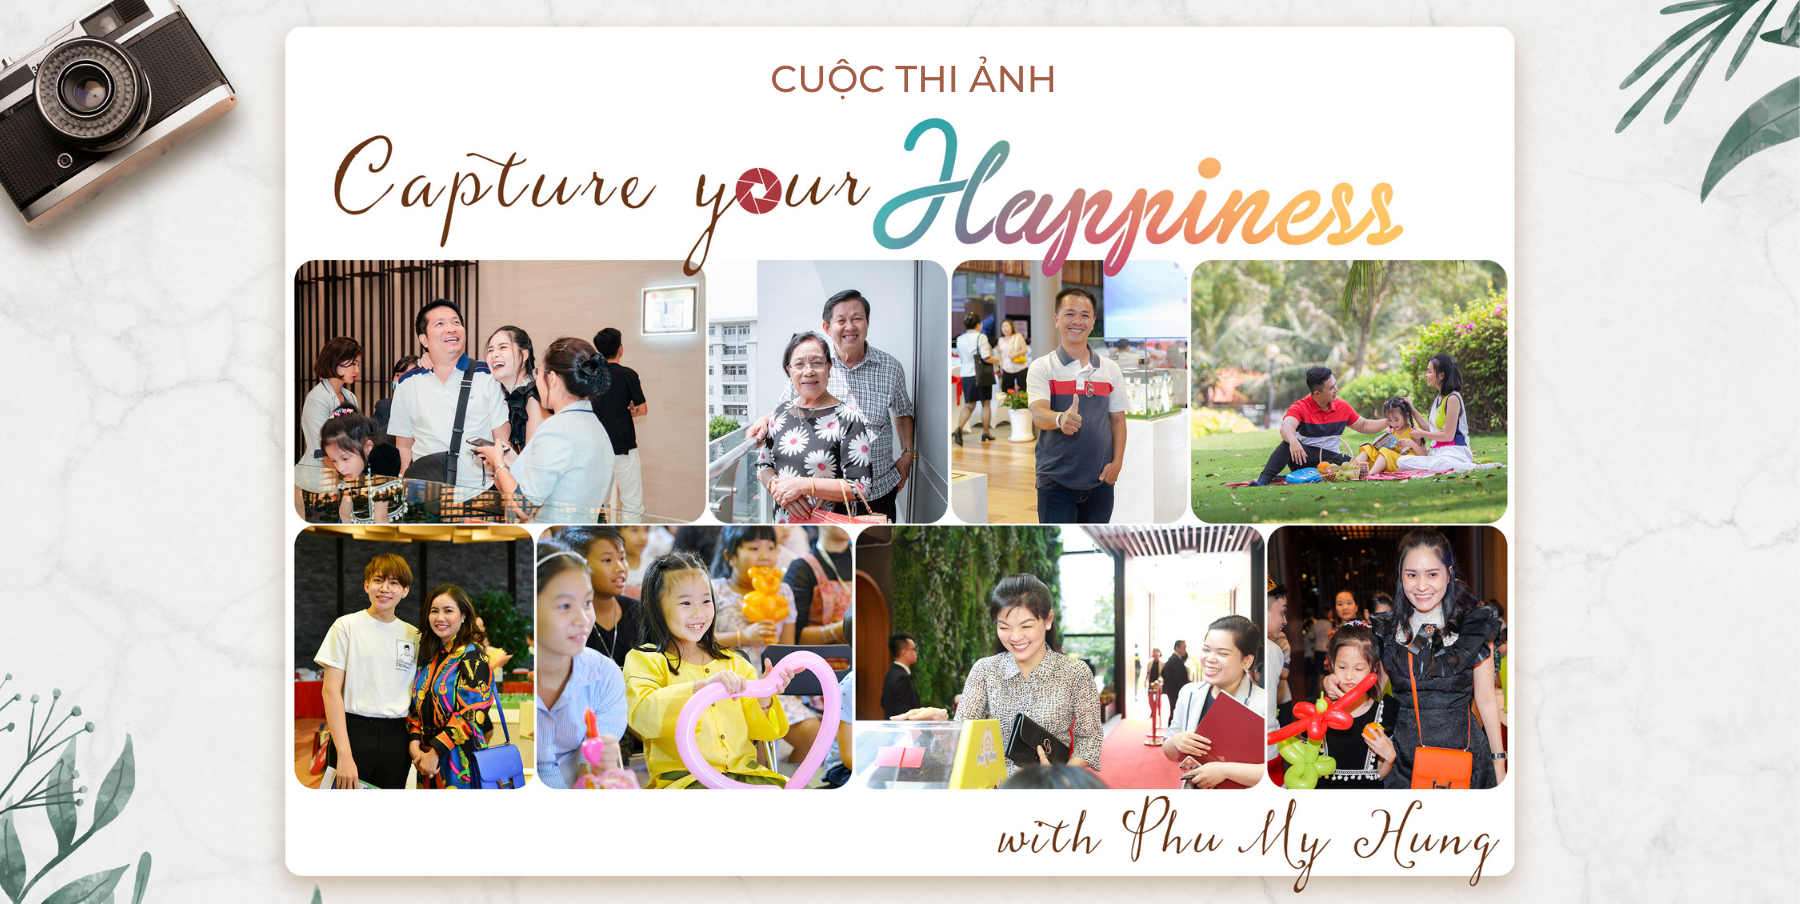 Cuộc thi ảnh “Capture Your Happiness”